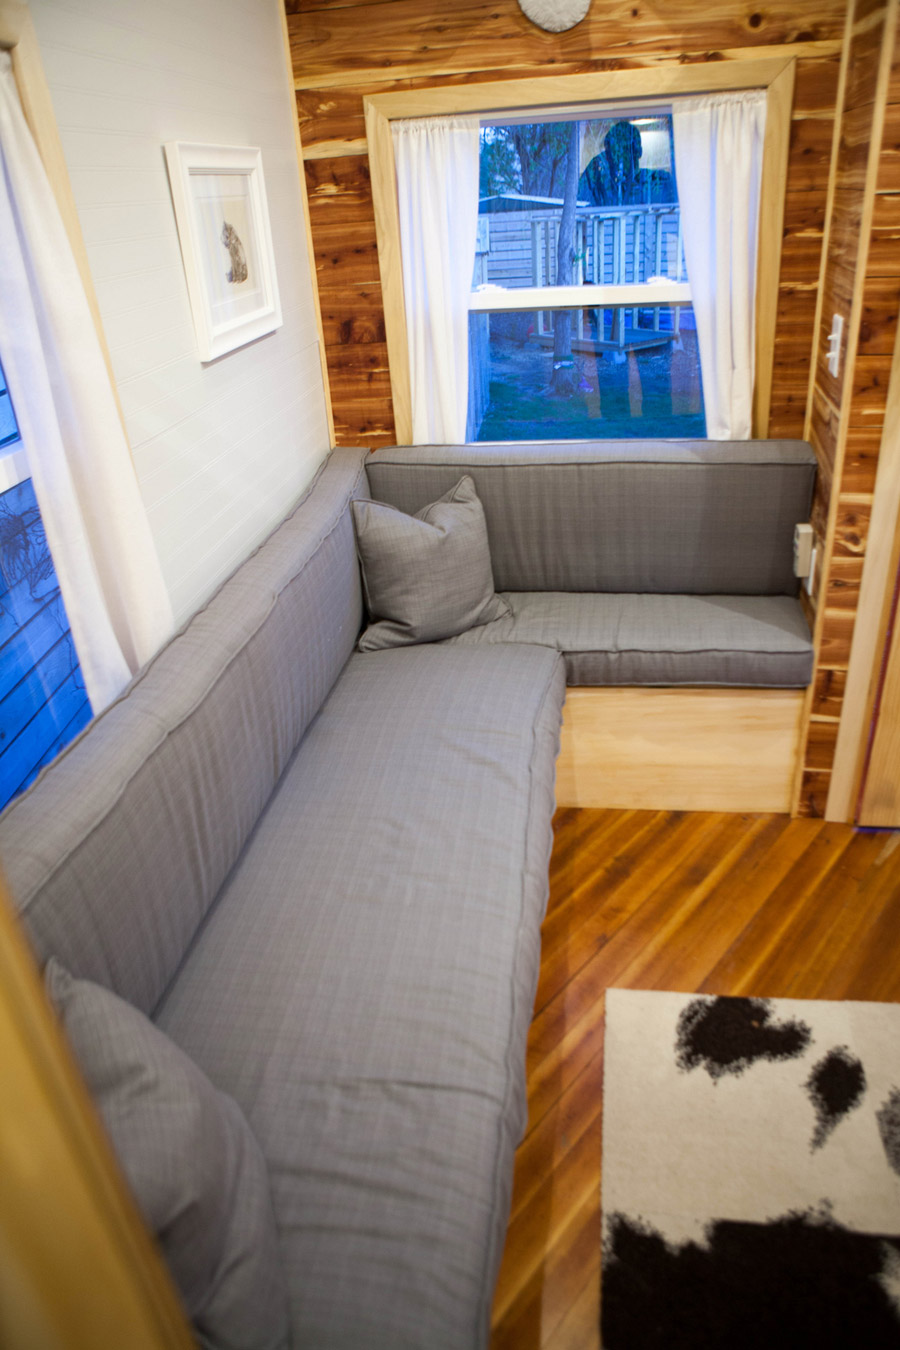 Looks Comfy in this Tiny House!